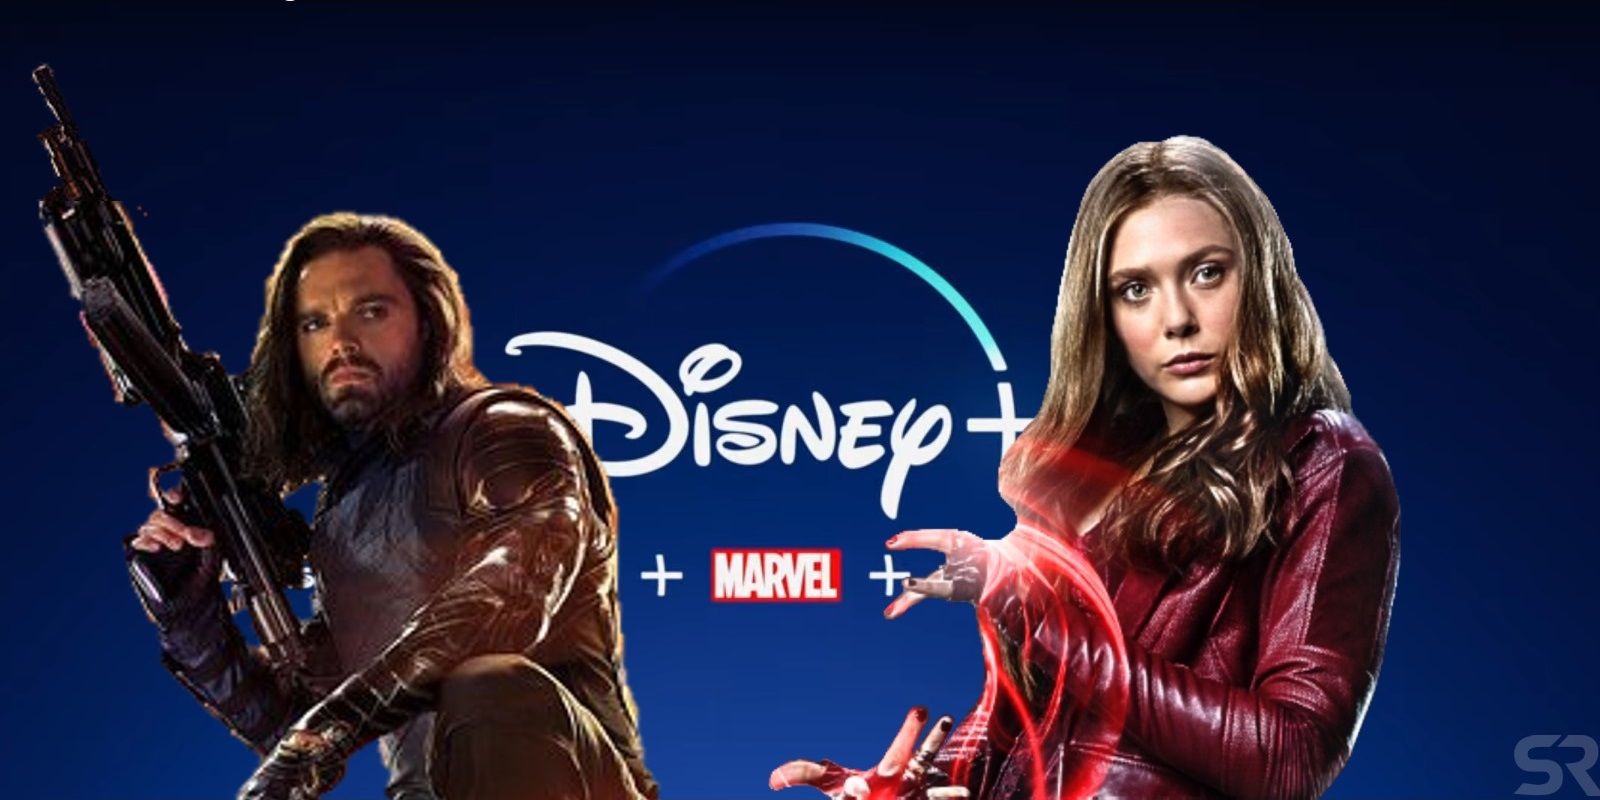 Wanda and Winter Soldier will be in shows on Disney+